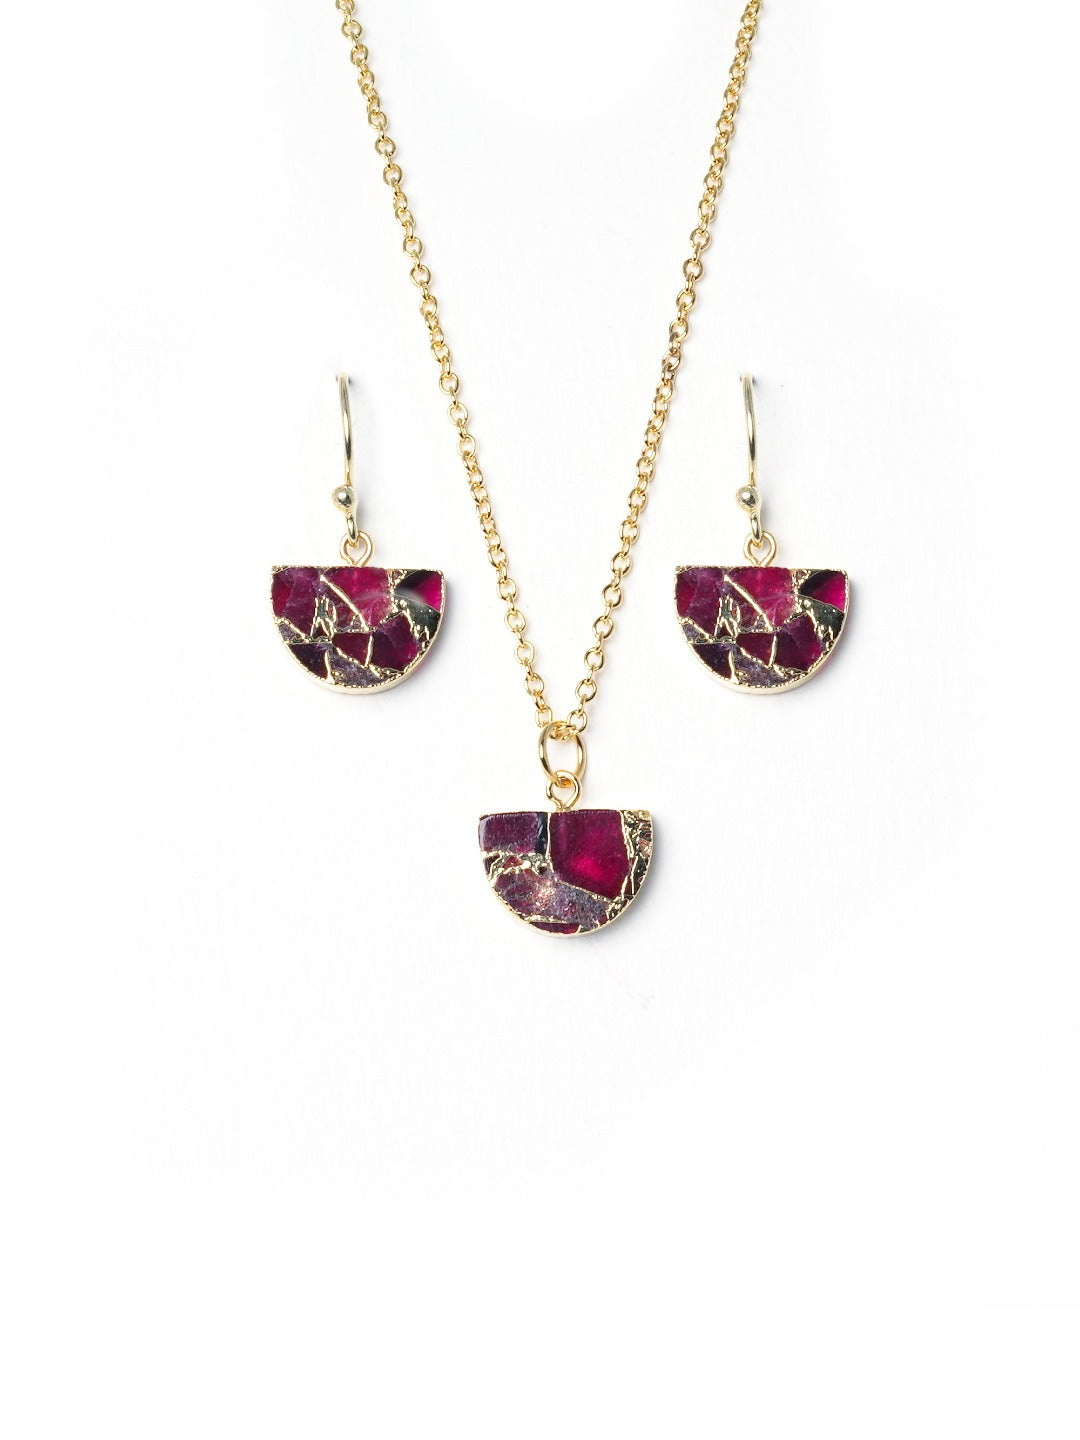 Half moon shaped ruby red pendant with small earrings